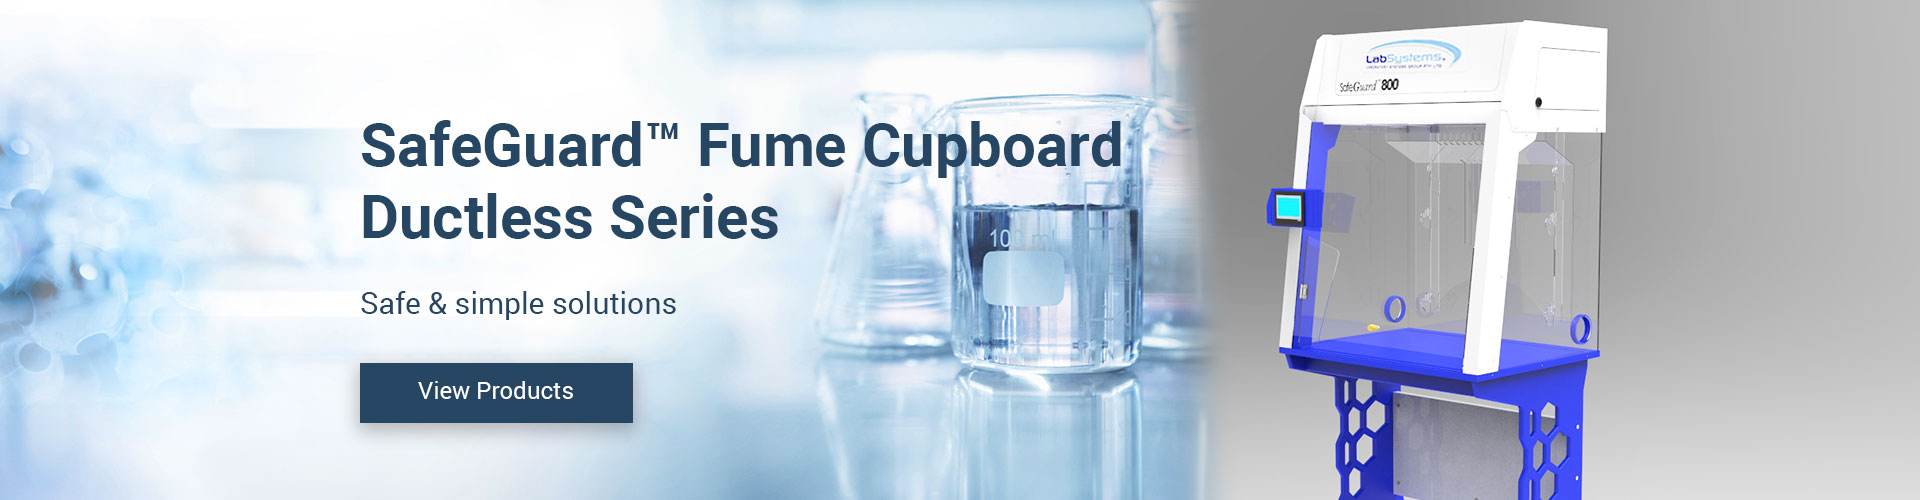 Browse Ductless Fume Cupboards